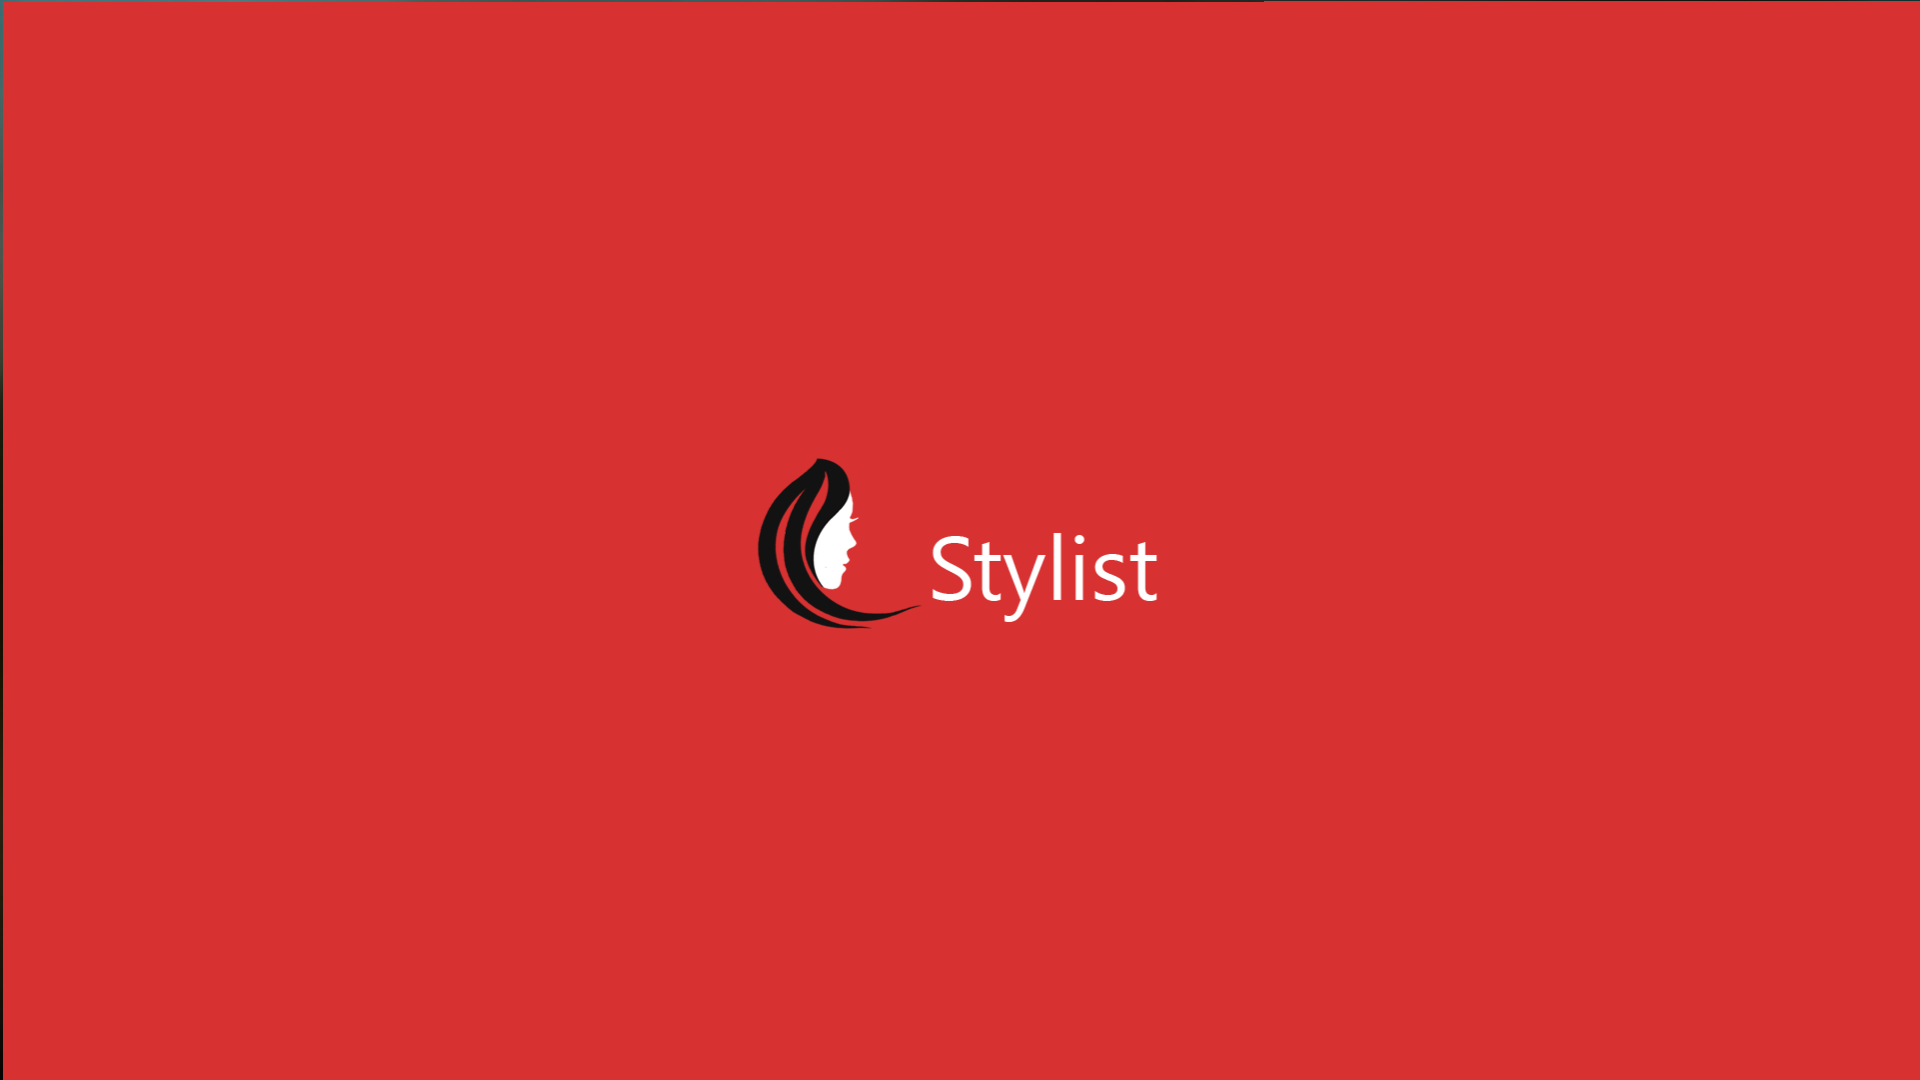 Stylist is all you need for a new look.